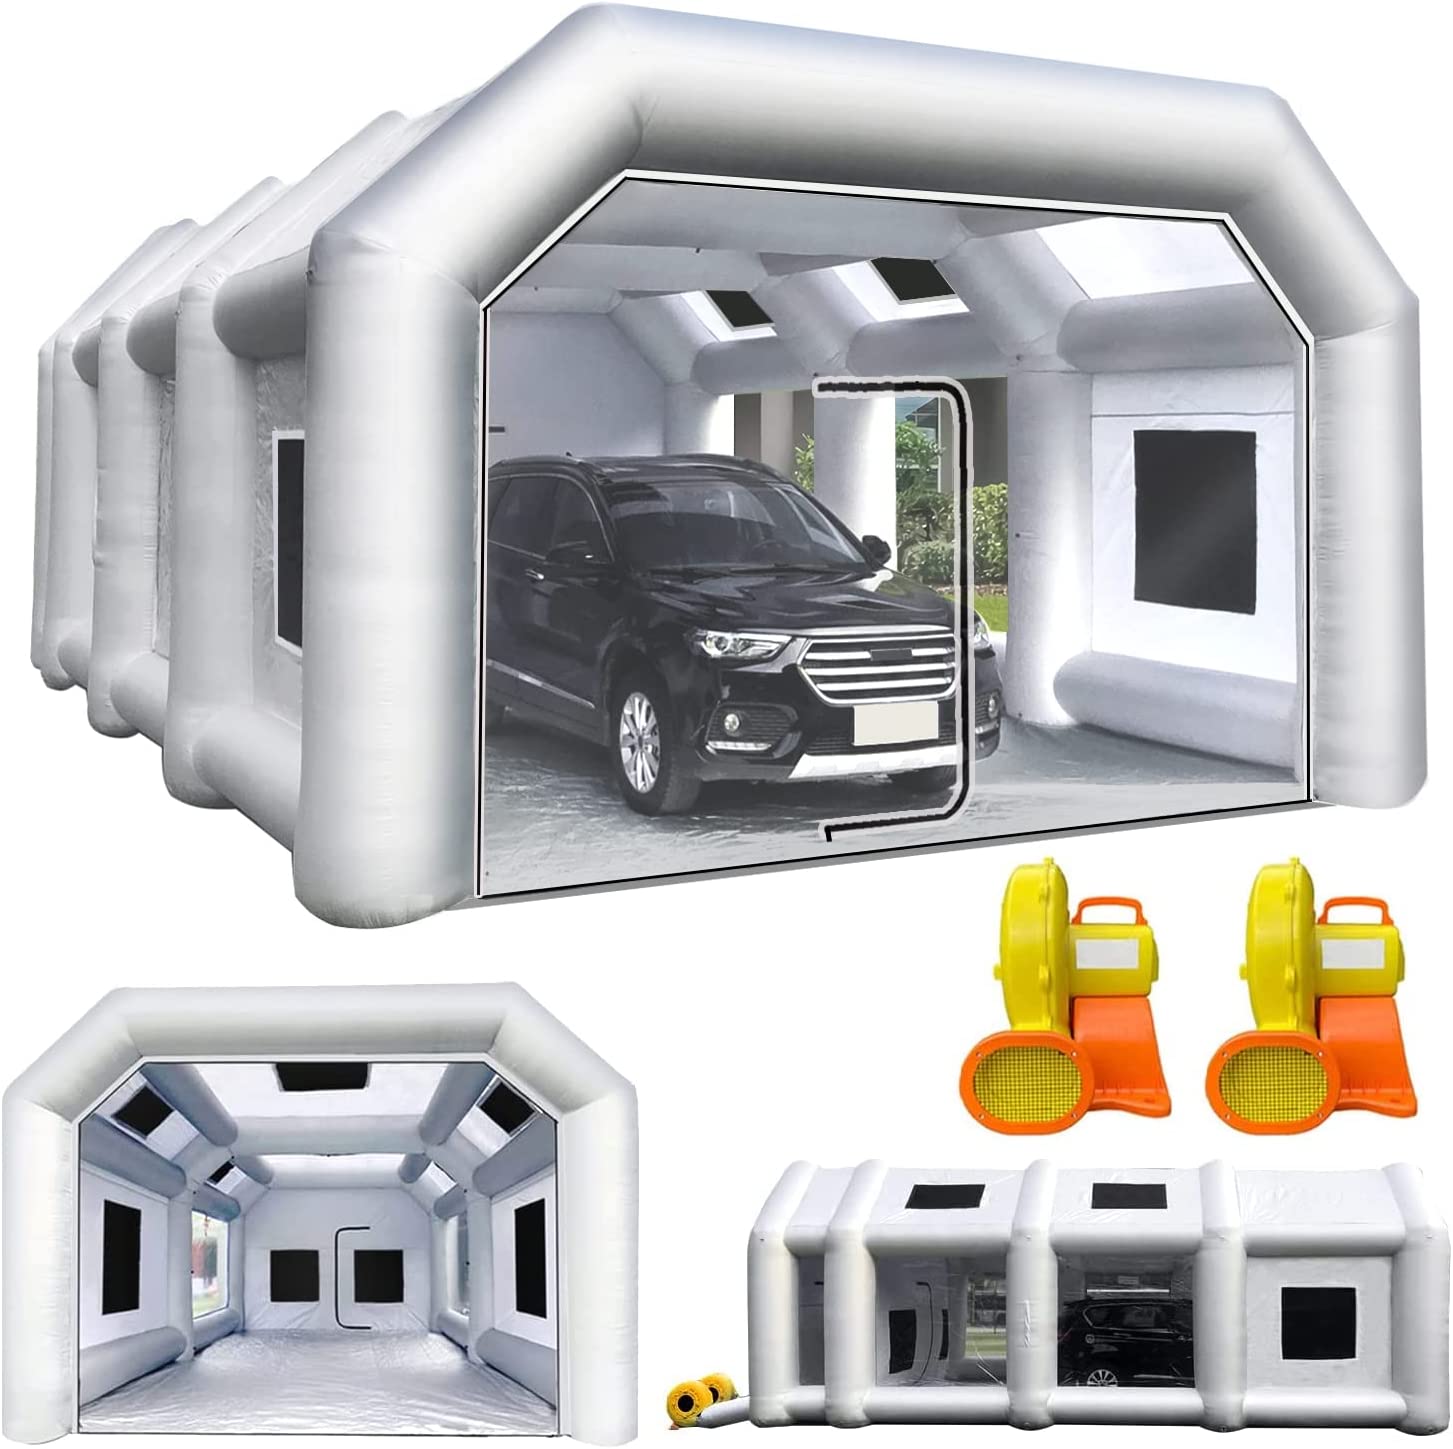 28X15X10FT Inflatable Spray Paint Booth Tent with Upgrade High-Power  Blowers 950W+950W, Professional Car Workstation Portable Auto Paint Booth  for